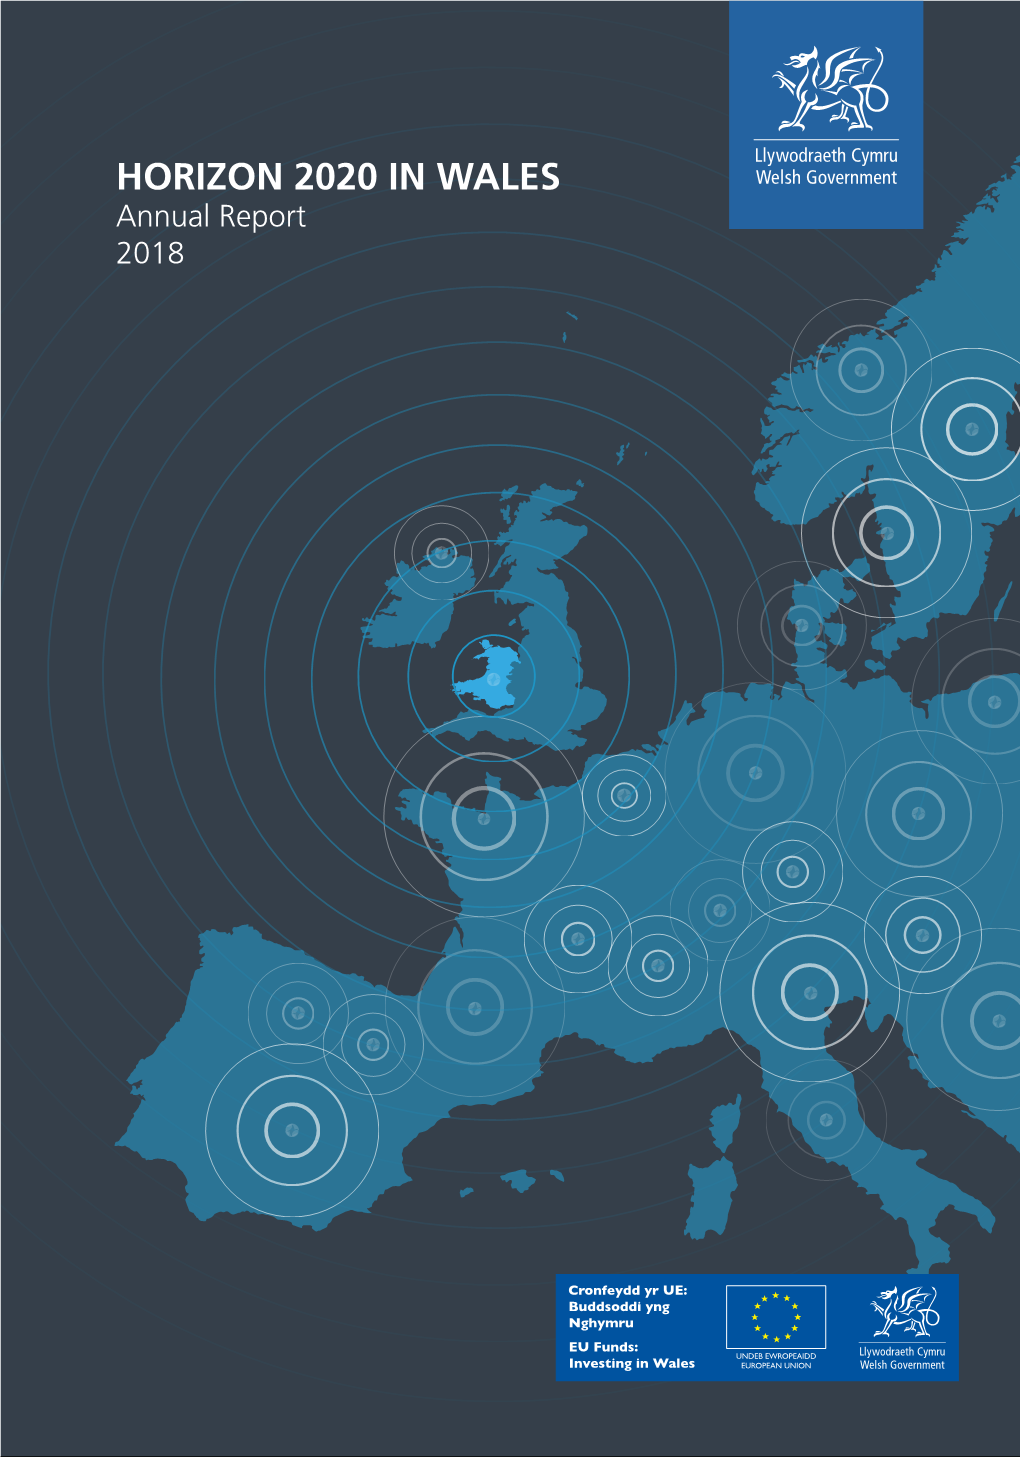 HORIZON 2020 in WALES Annual Report 2018